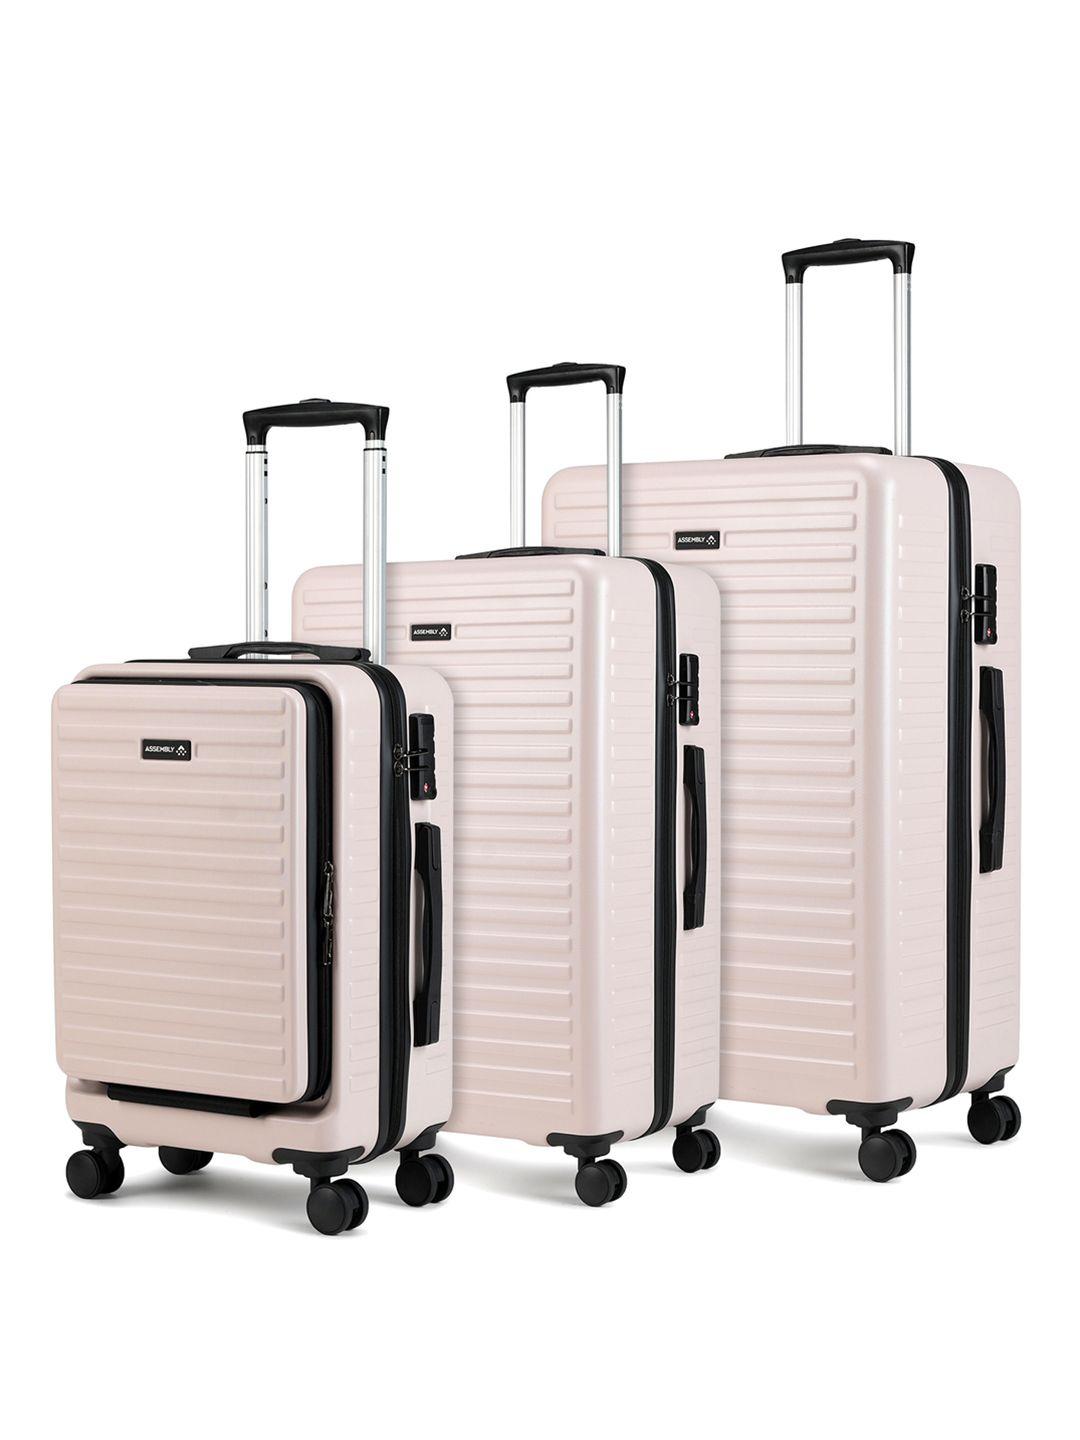 assembly set of 3 textured 360 degree rotation hard-sided trolley bags 42l, 67l & 94l